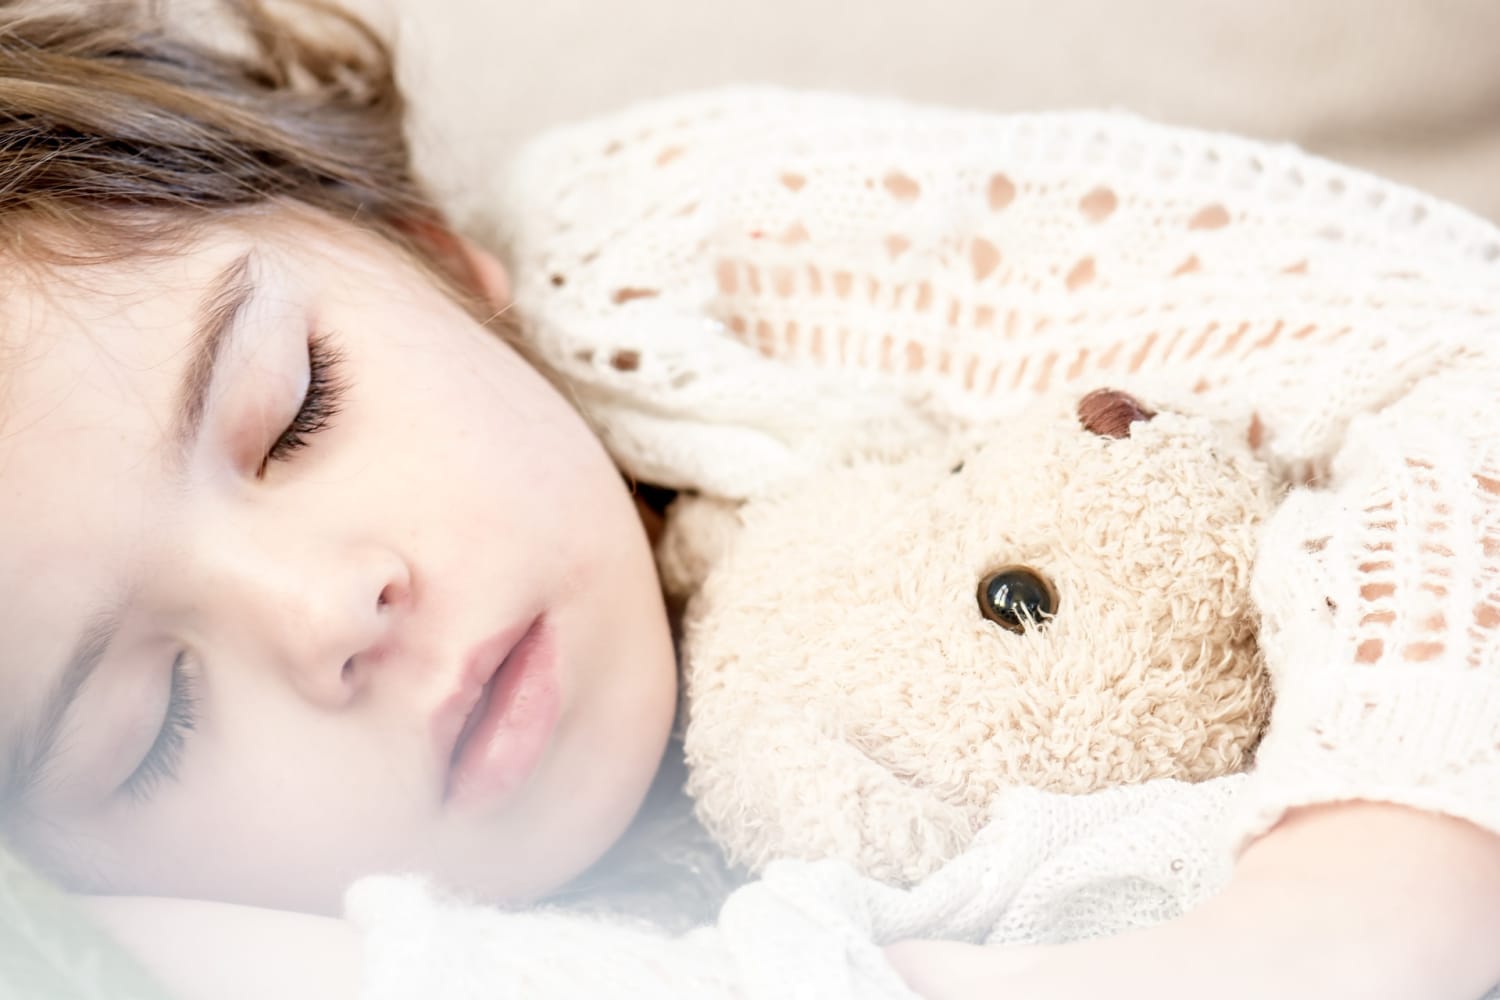 Questions From Parents: Can Preschool Force My Child to Nap?